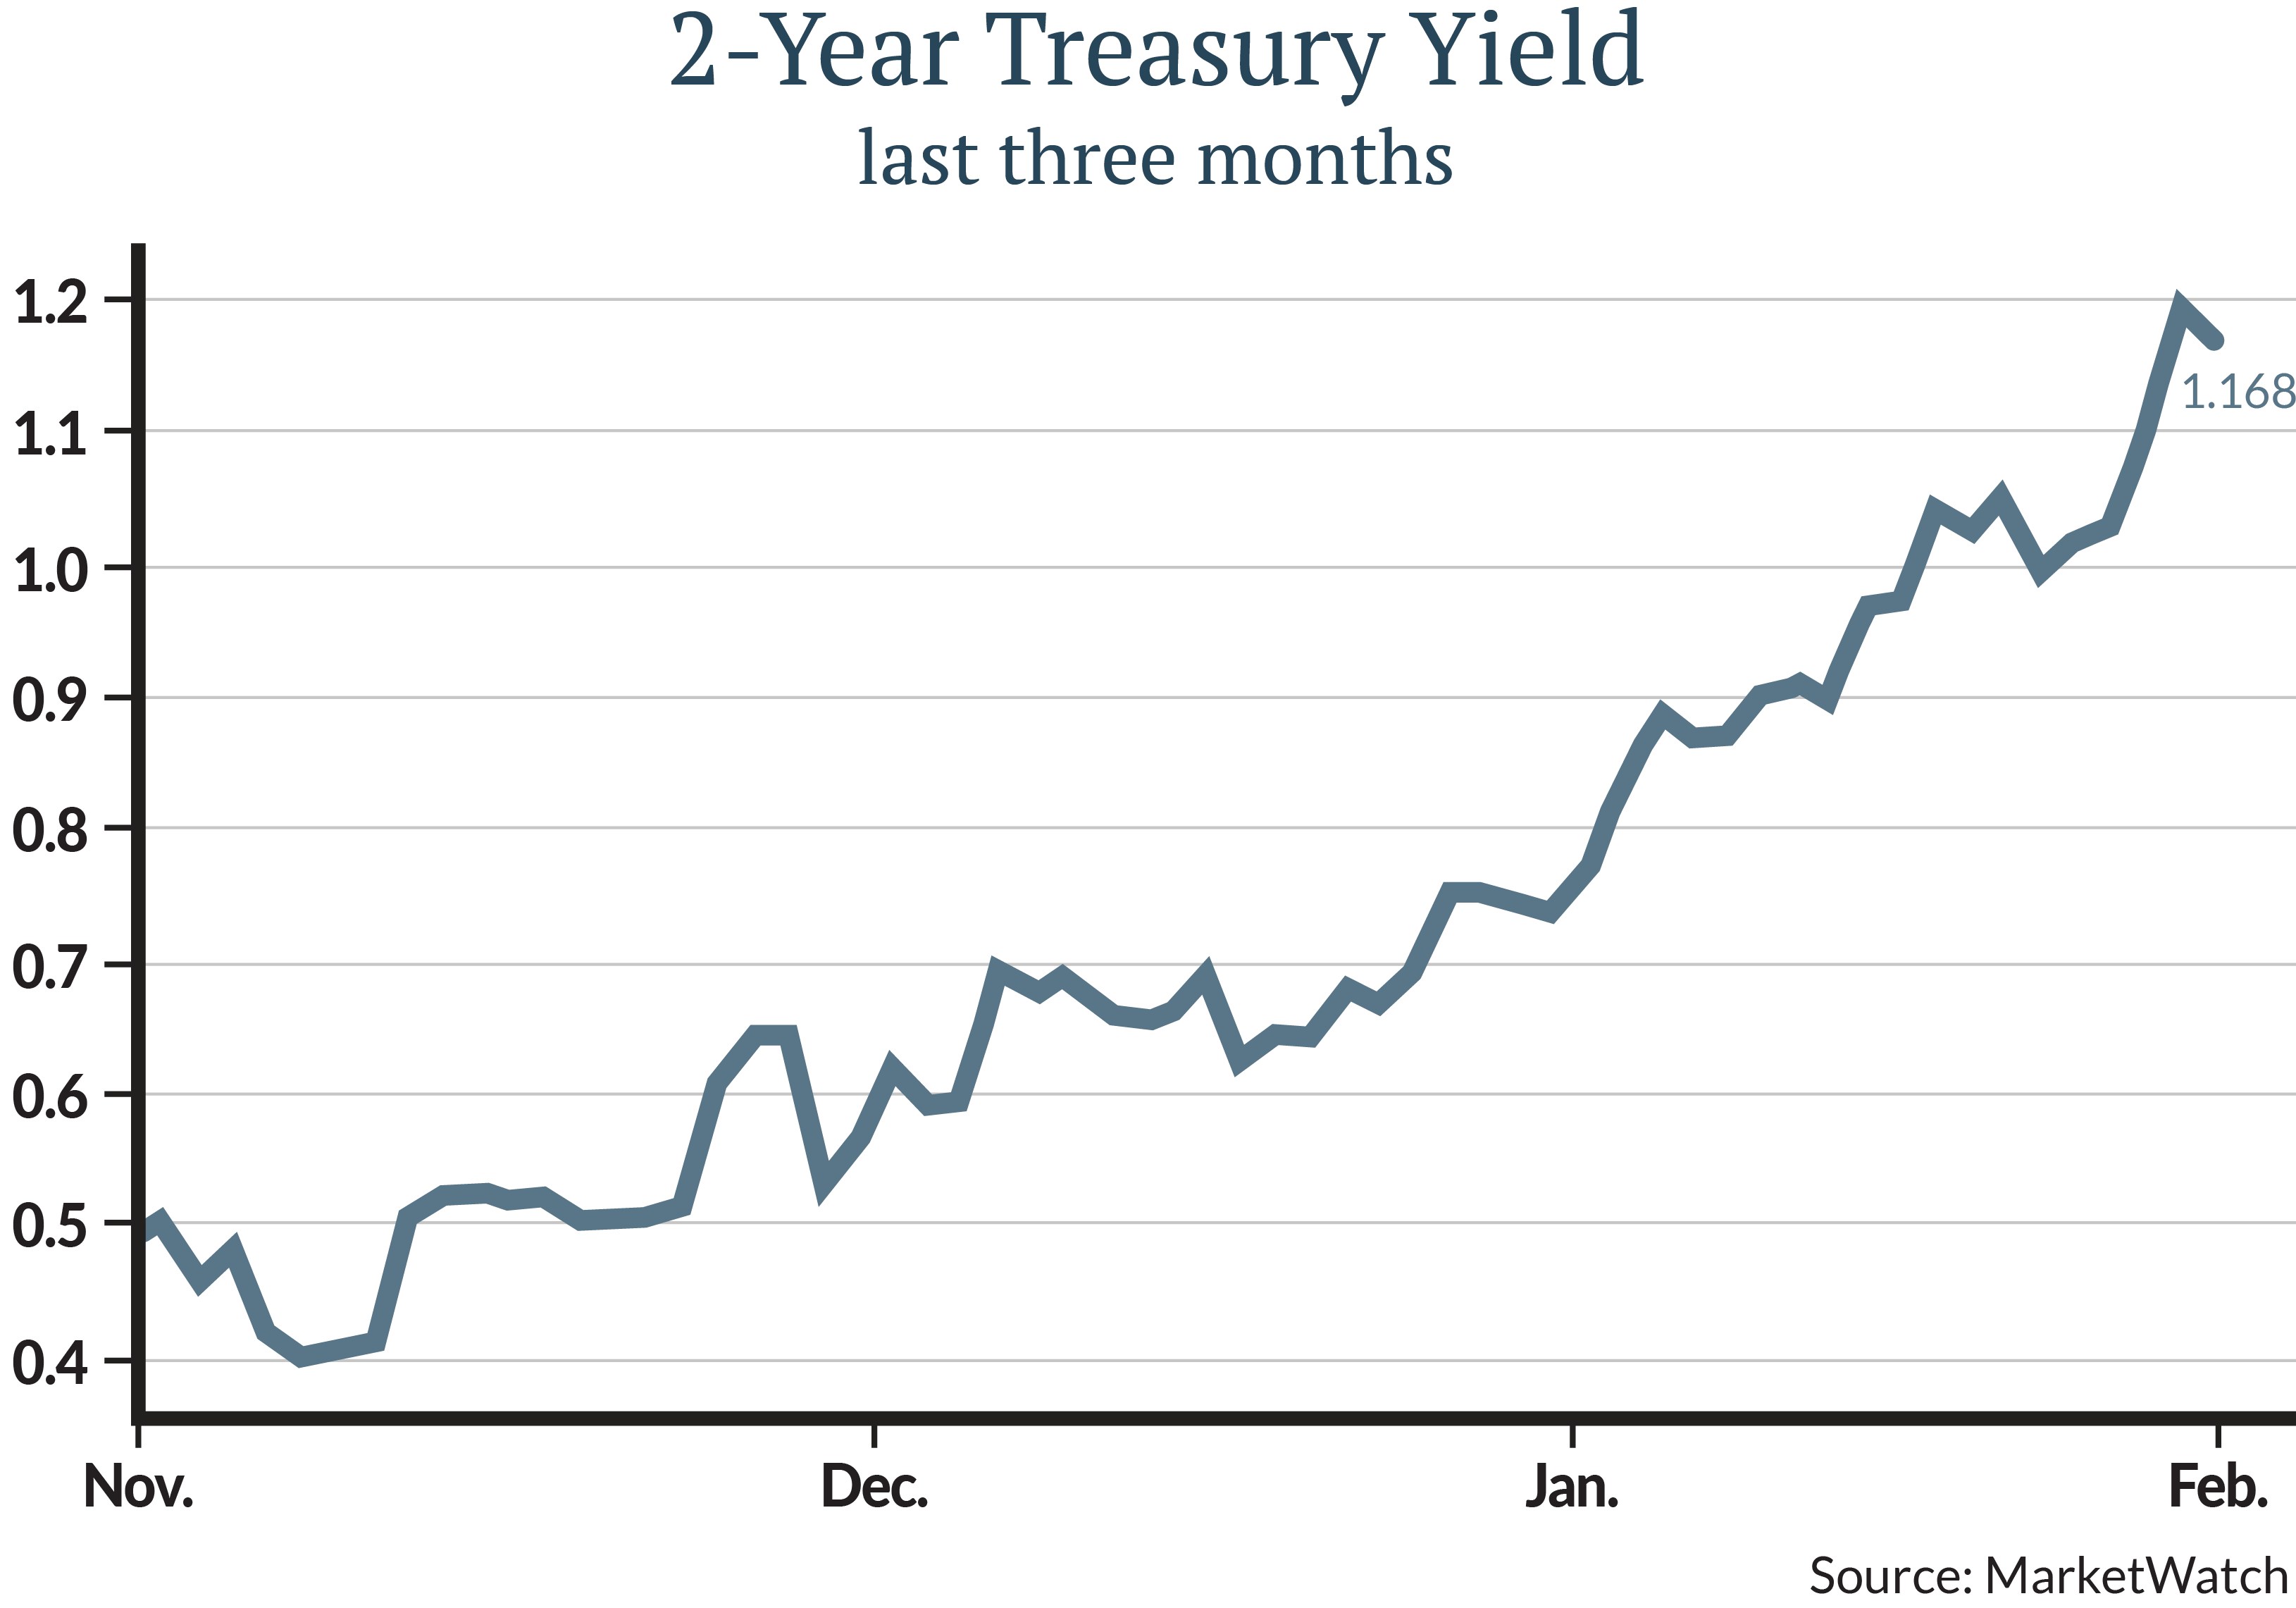 Look at the yield on the 2-year Treasury in the last three months. It has risen from less than 0.4% to 1.16%, and almost half of that move took place since the beginning of the year. When interest rates rise, the required return for stock investors must also rise; that’s our “r.”